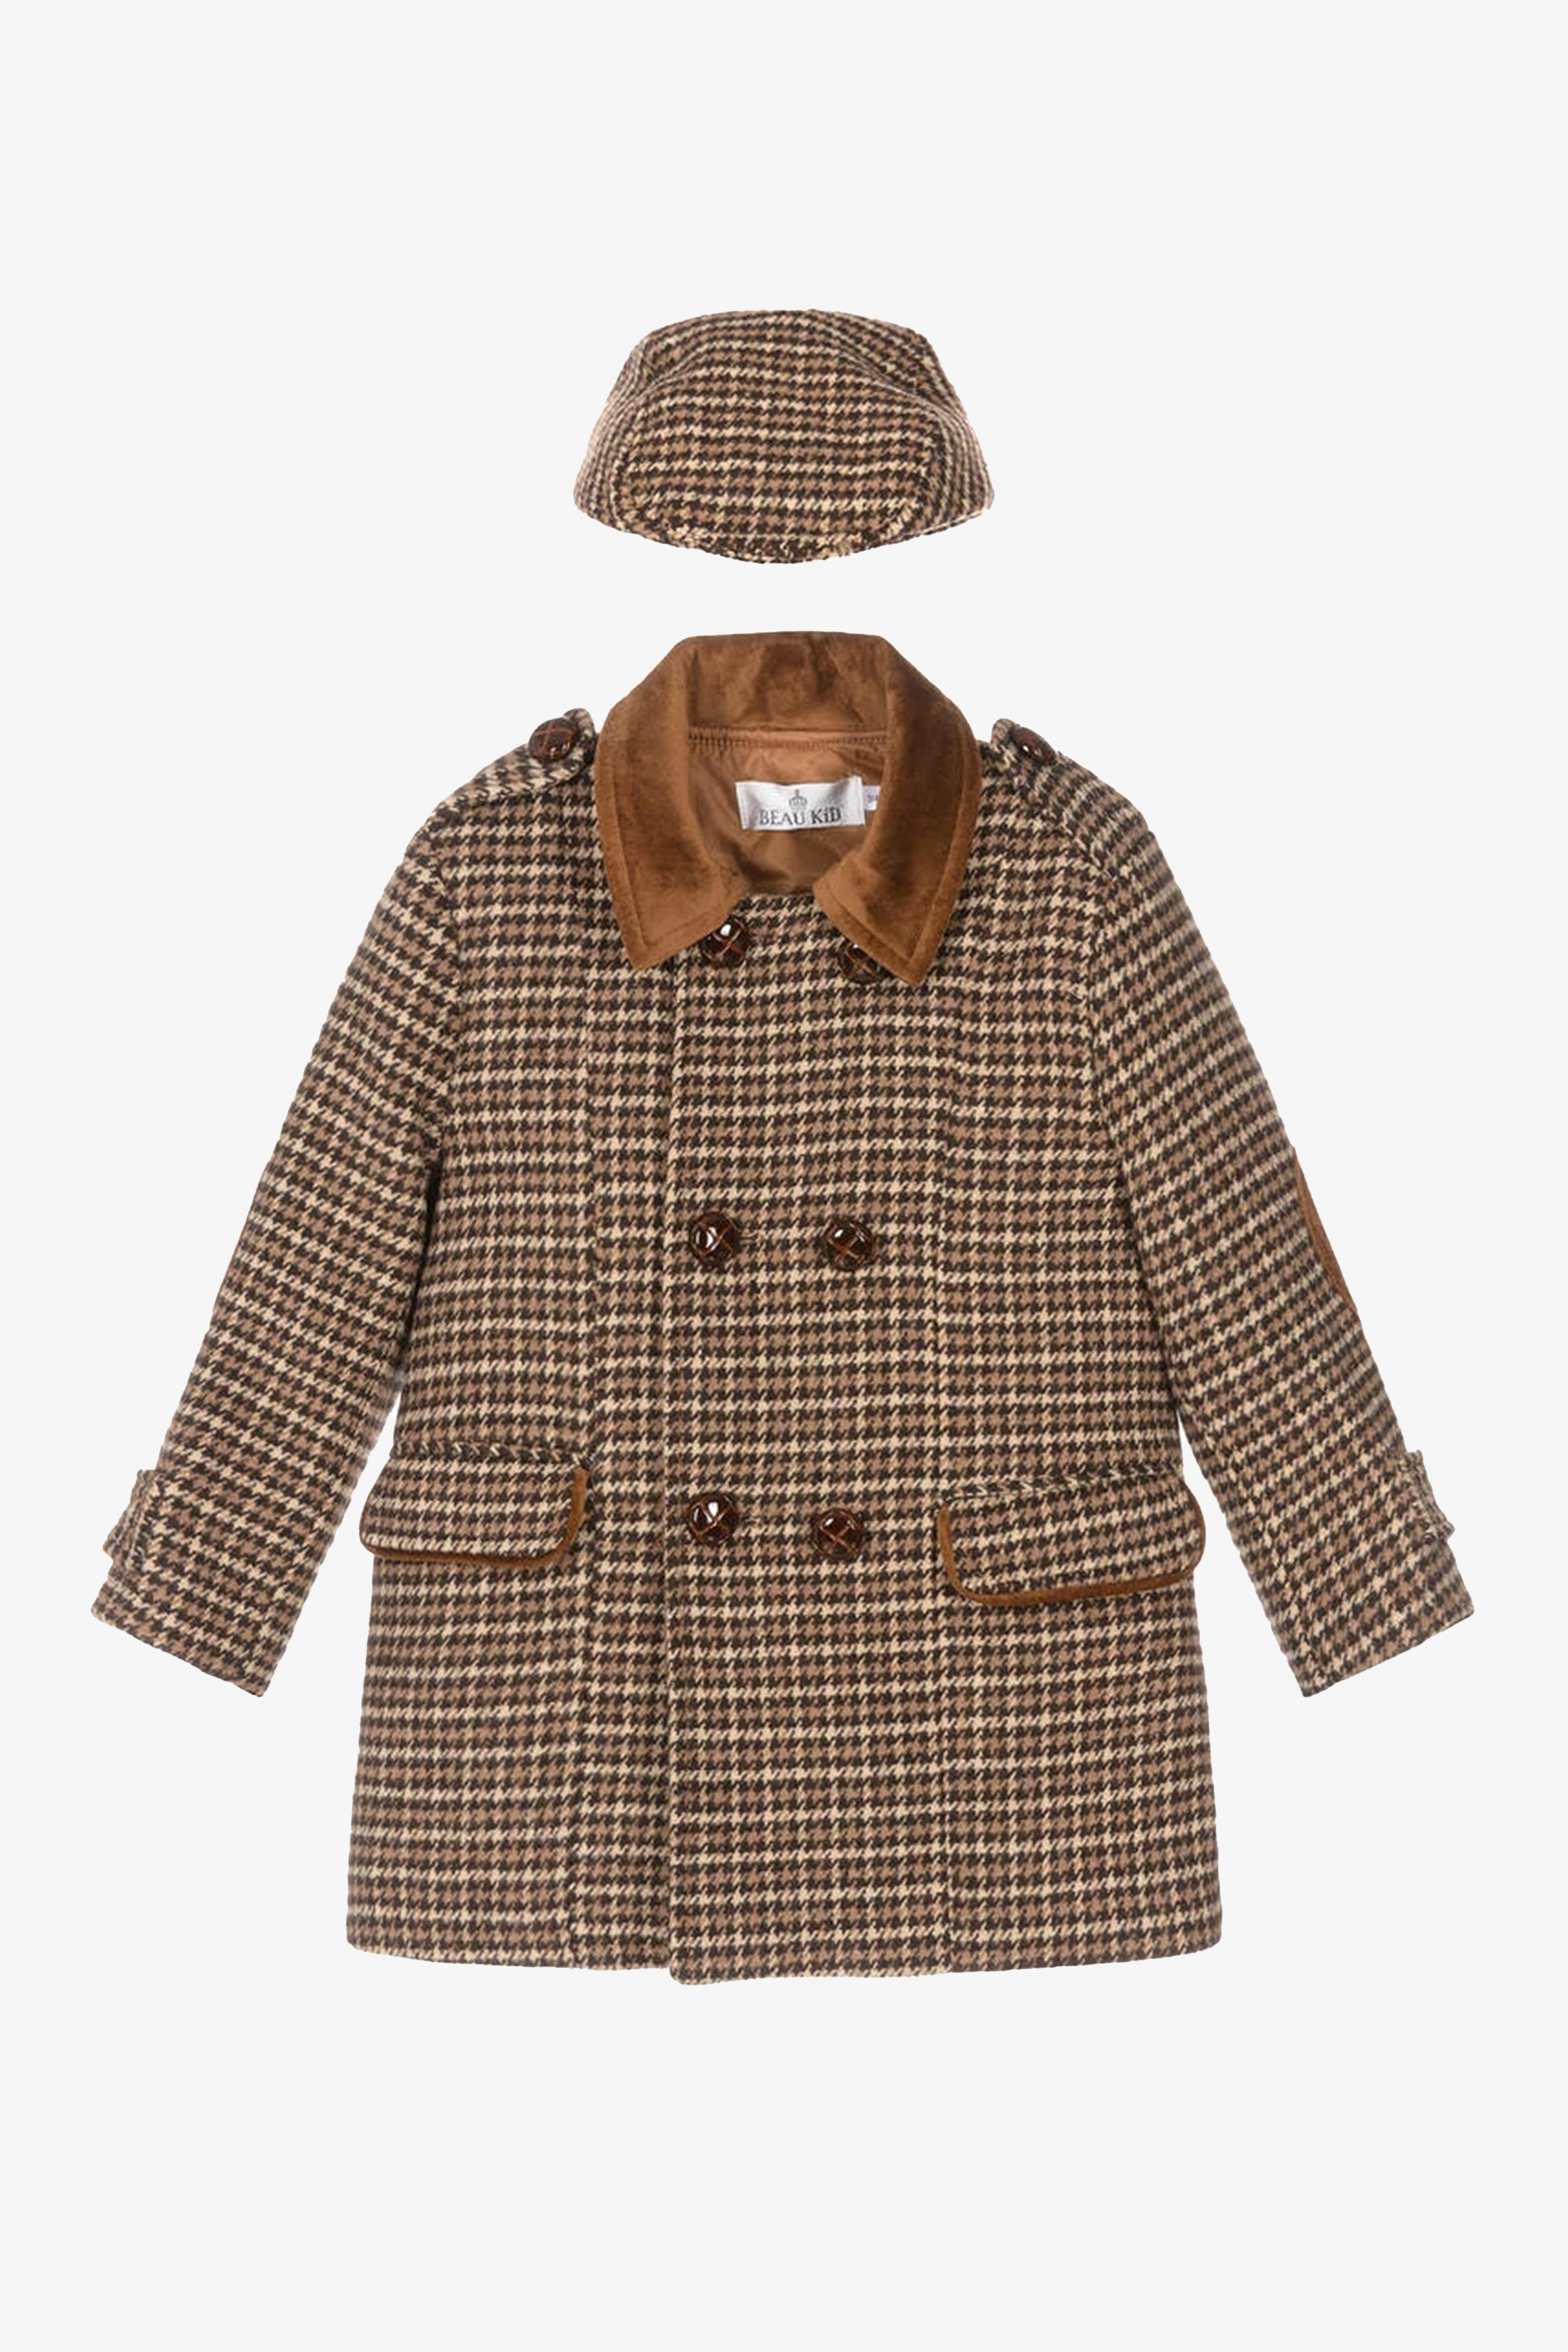 Boys Tweed Houndstooth Pea Coat with Matching Cap - Brown